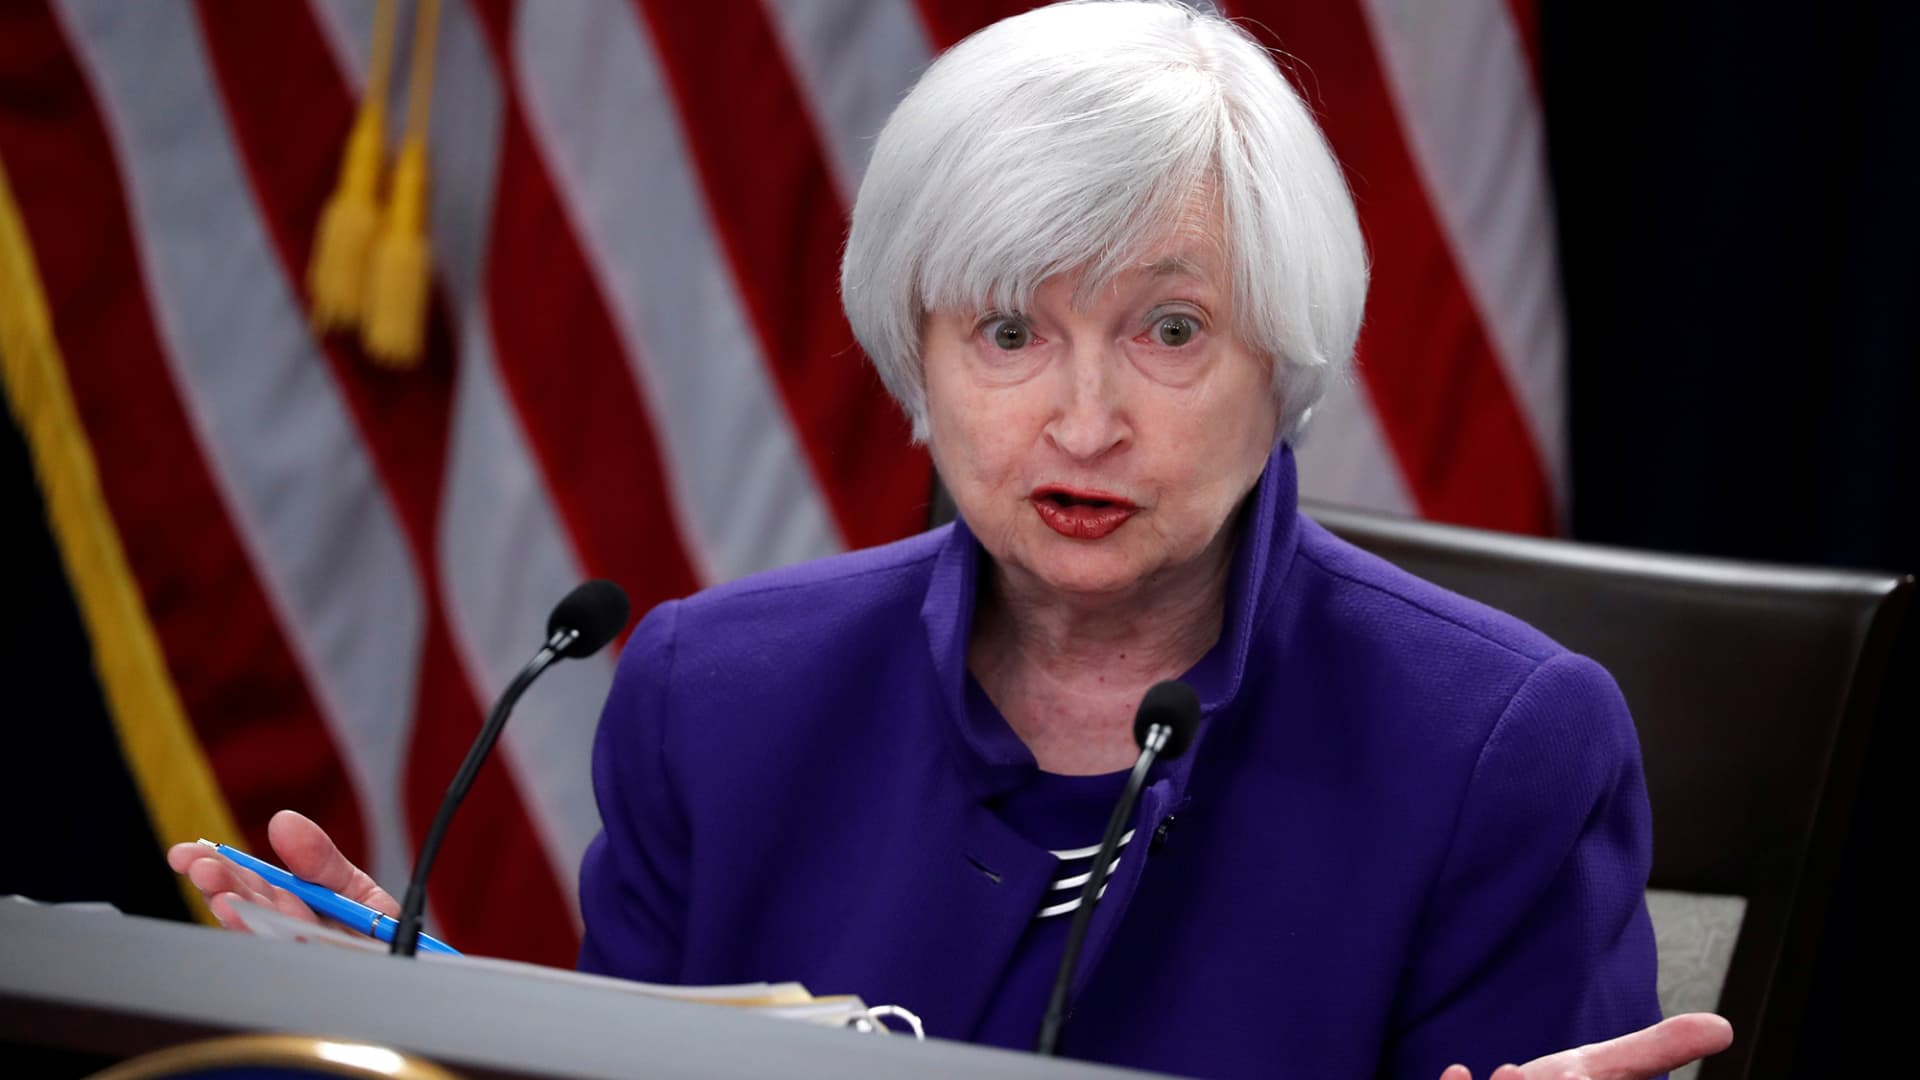 U.S. outgoing Federal Reserve Chair Janet Yellen holds a news conference after a two-day Federal Open Market Committee (FOMC) meeting in Washington, U.S. December 13, 2017.